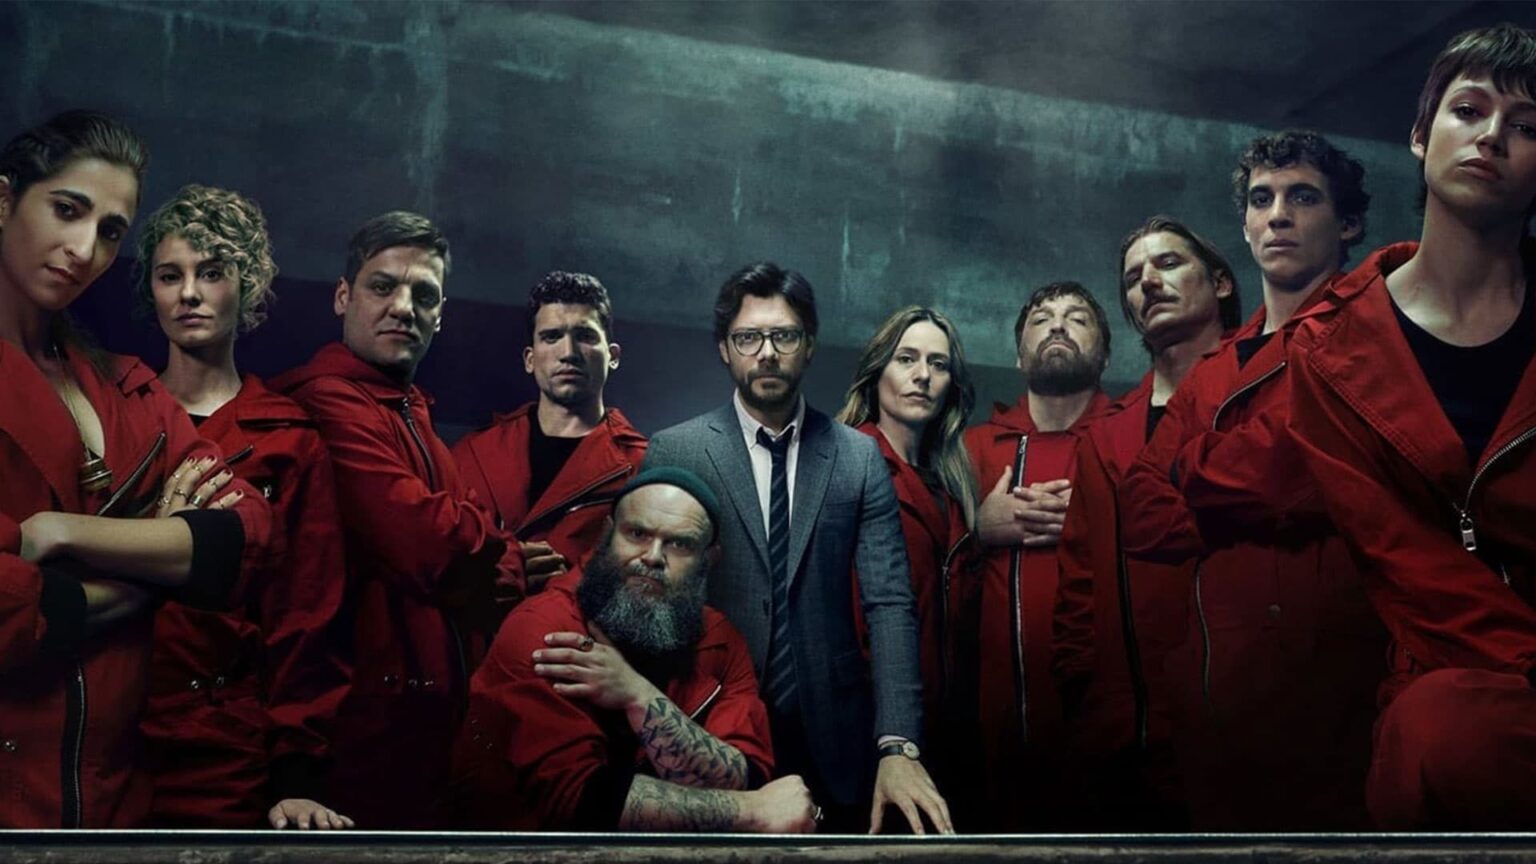 When 'Money Heist' switched over to Netflix for season 3, the production budget maximized, taking the crew international. Check out these filming locations.